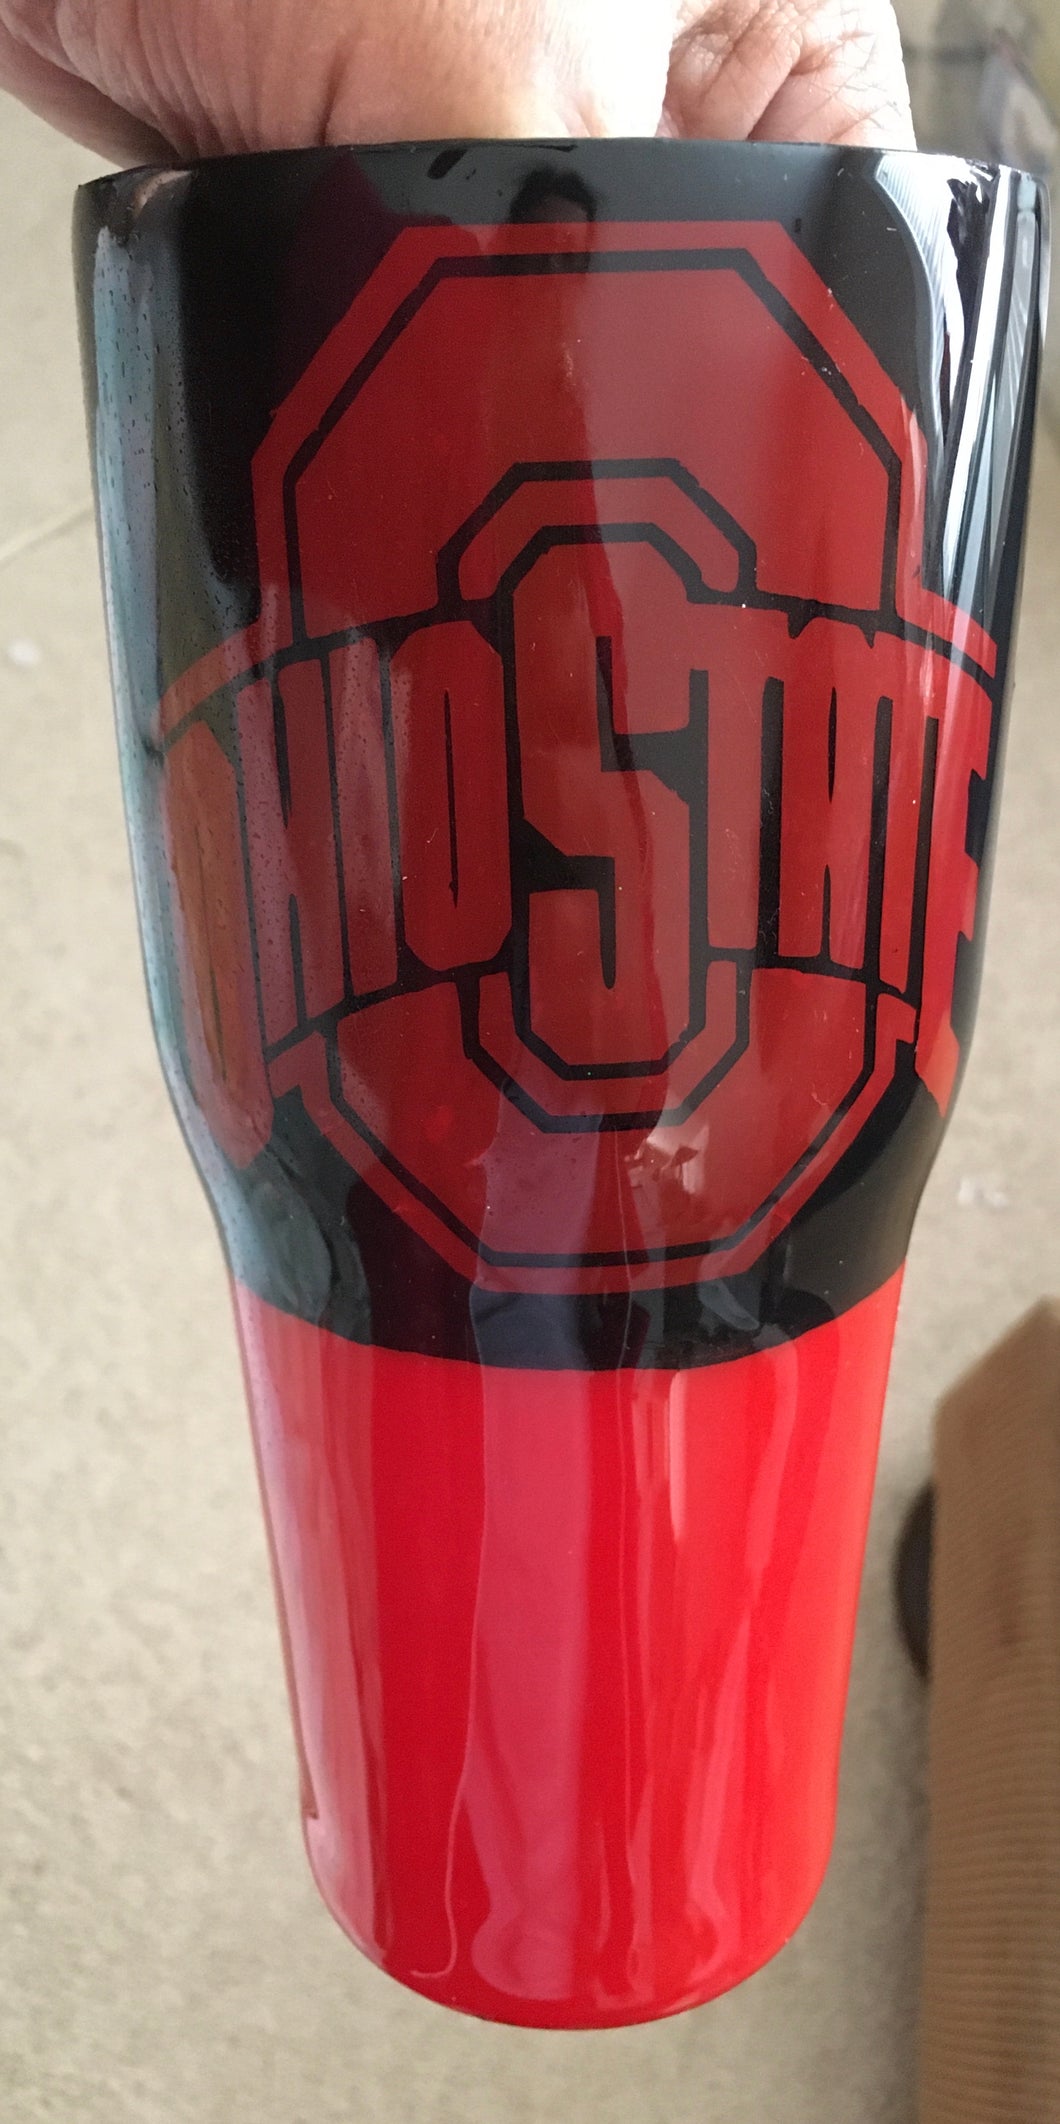 Hey there, Ohio State super-fans! 🌟 🏈 Our 30-ounce stainless steel cup is the ultimate tribute to all the devoted fan-dads out there! 🙌 🎉 It's like a canvas of Buckeye pride, jazzed up with personalized vinyl, paint, and FDA-approved epoxy artistry. 🎨✨ This cup comes with a trusty lid and magical powers to keep your drinks hot or cold for hours—game day just got an upgrade!